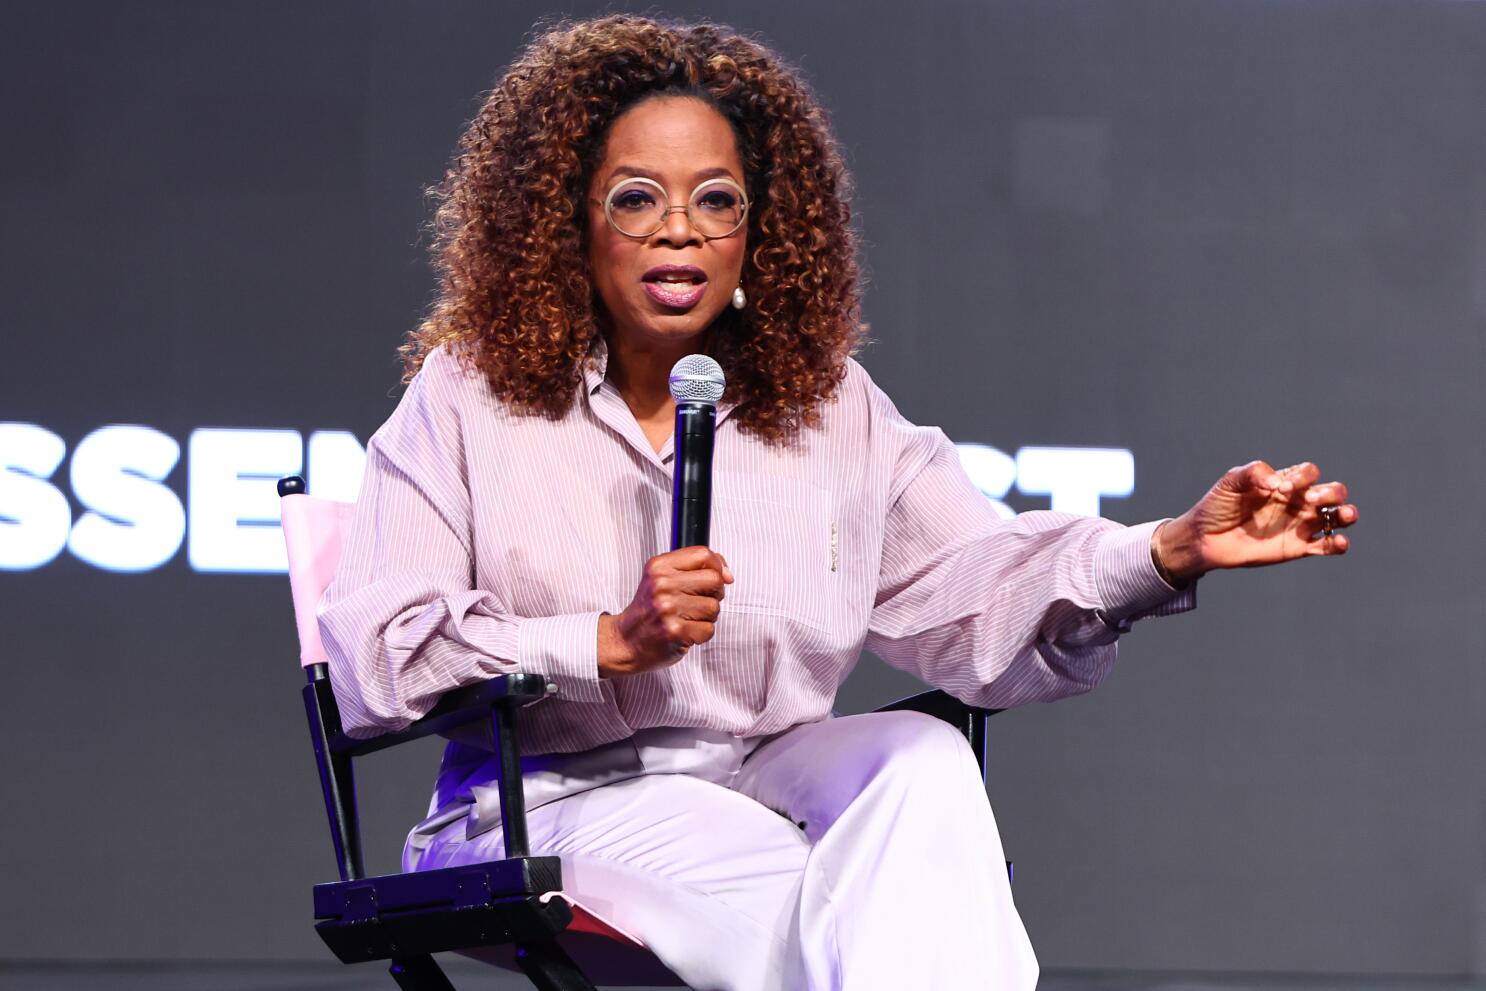  Oprah Winfrey slams those who use Ozempic for weight loss